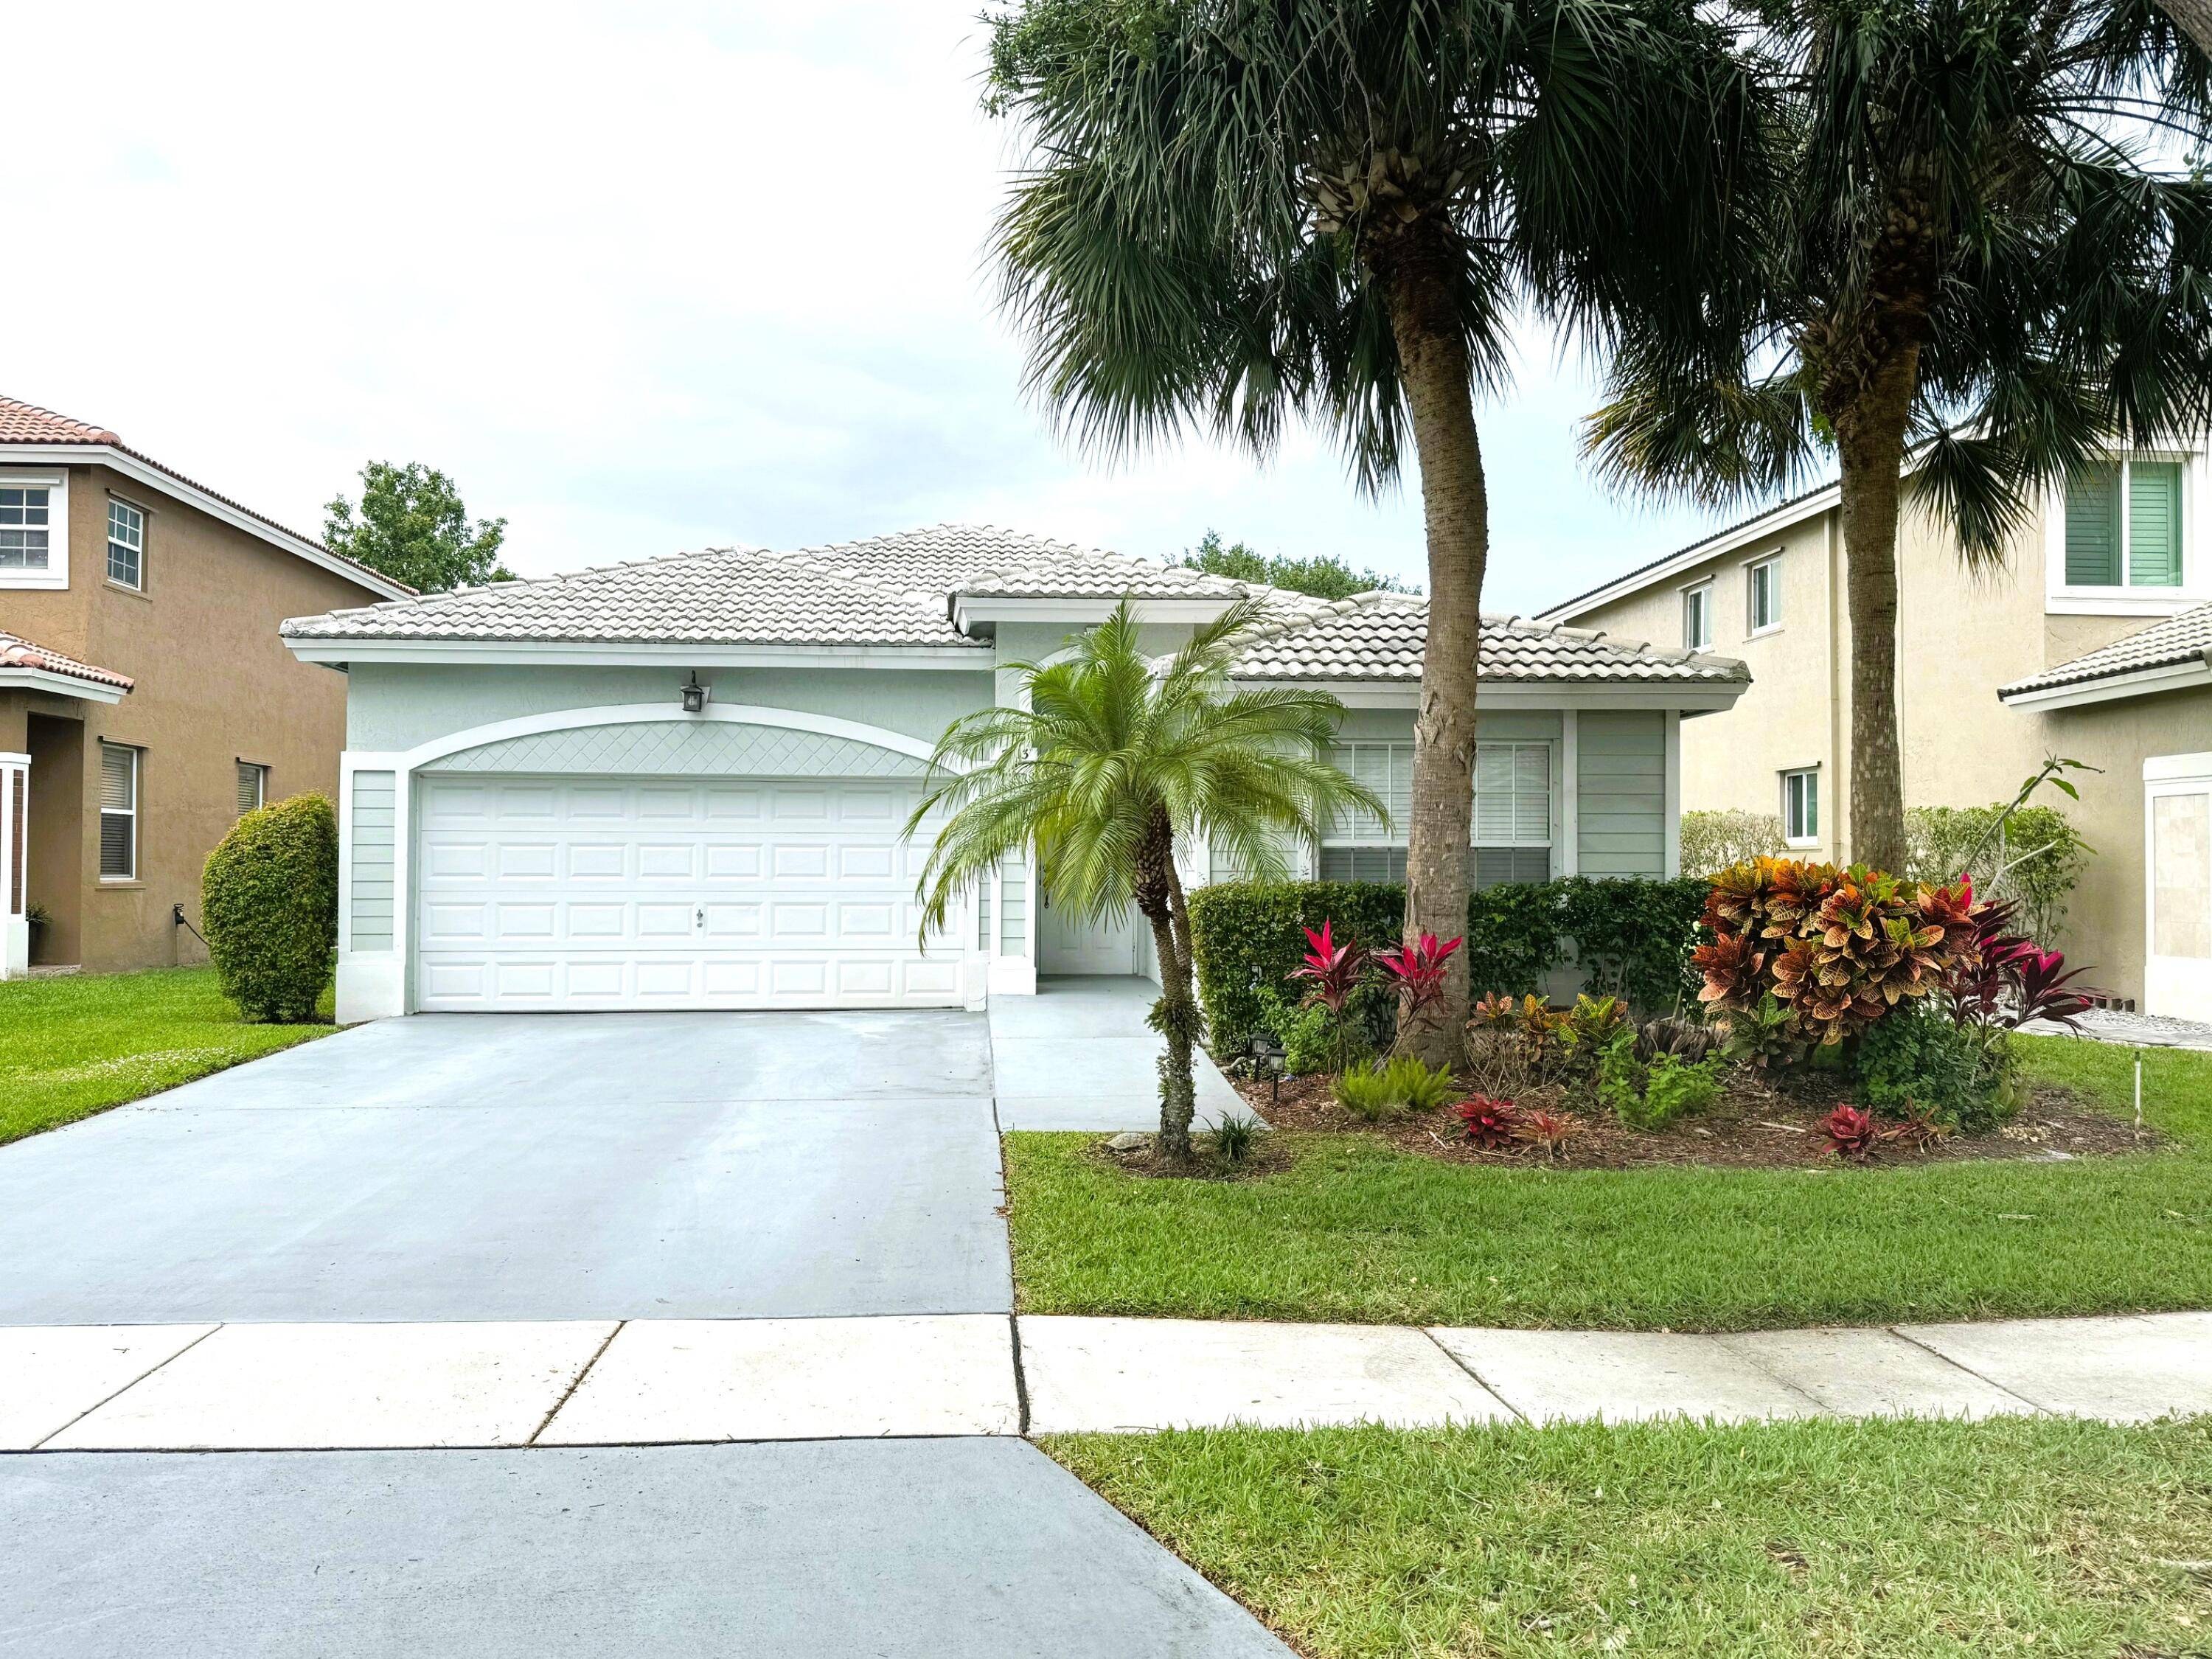 Prestigious Parkland Area Popular Gated Community Beautiful Pool Home 3 Bedrooms 2 Baths Fenced Backyard 2 Car Garage Upgraded Kitchen 42'' Wood Cabinets Granite Tops Center Island with Drawers Stainless ...